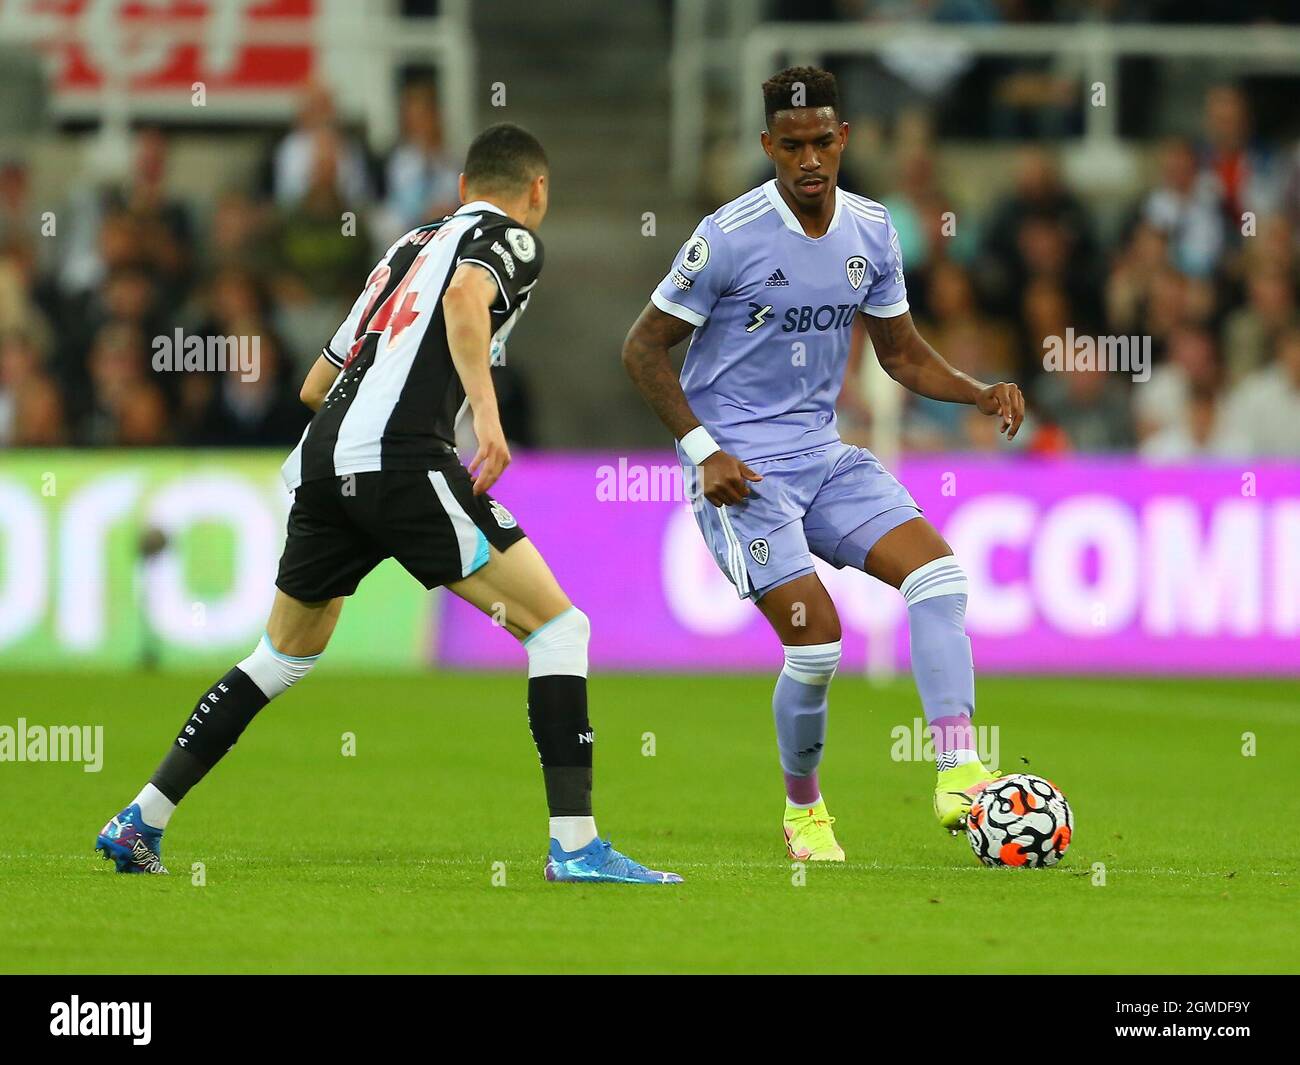 NEWCASTLE UPON TYNE, ENGLAND - SEPTEMBER 17: Junior Firpo of Leeds United  and Miguel Almiron of Newcastle United during the Premier League match between Newcastle United and Leeds United at St. James Park on September 17, 2021 in Newcastle upon Tyne, England. (Photo by MB Media) Stock Photo